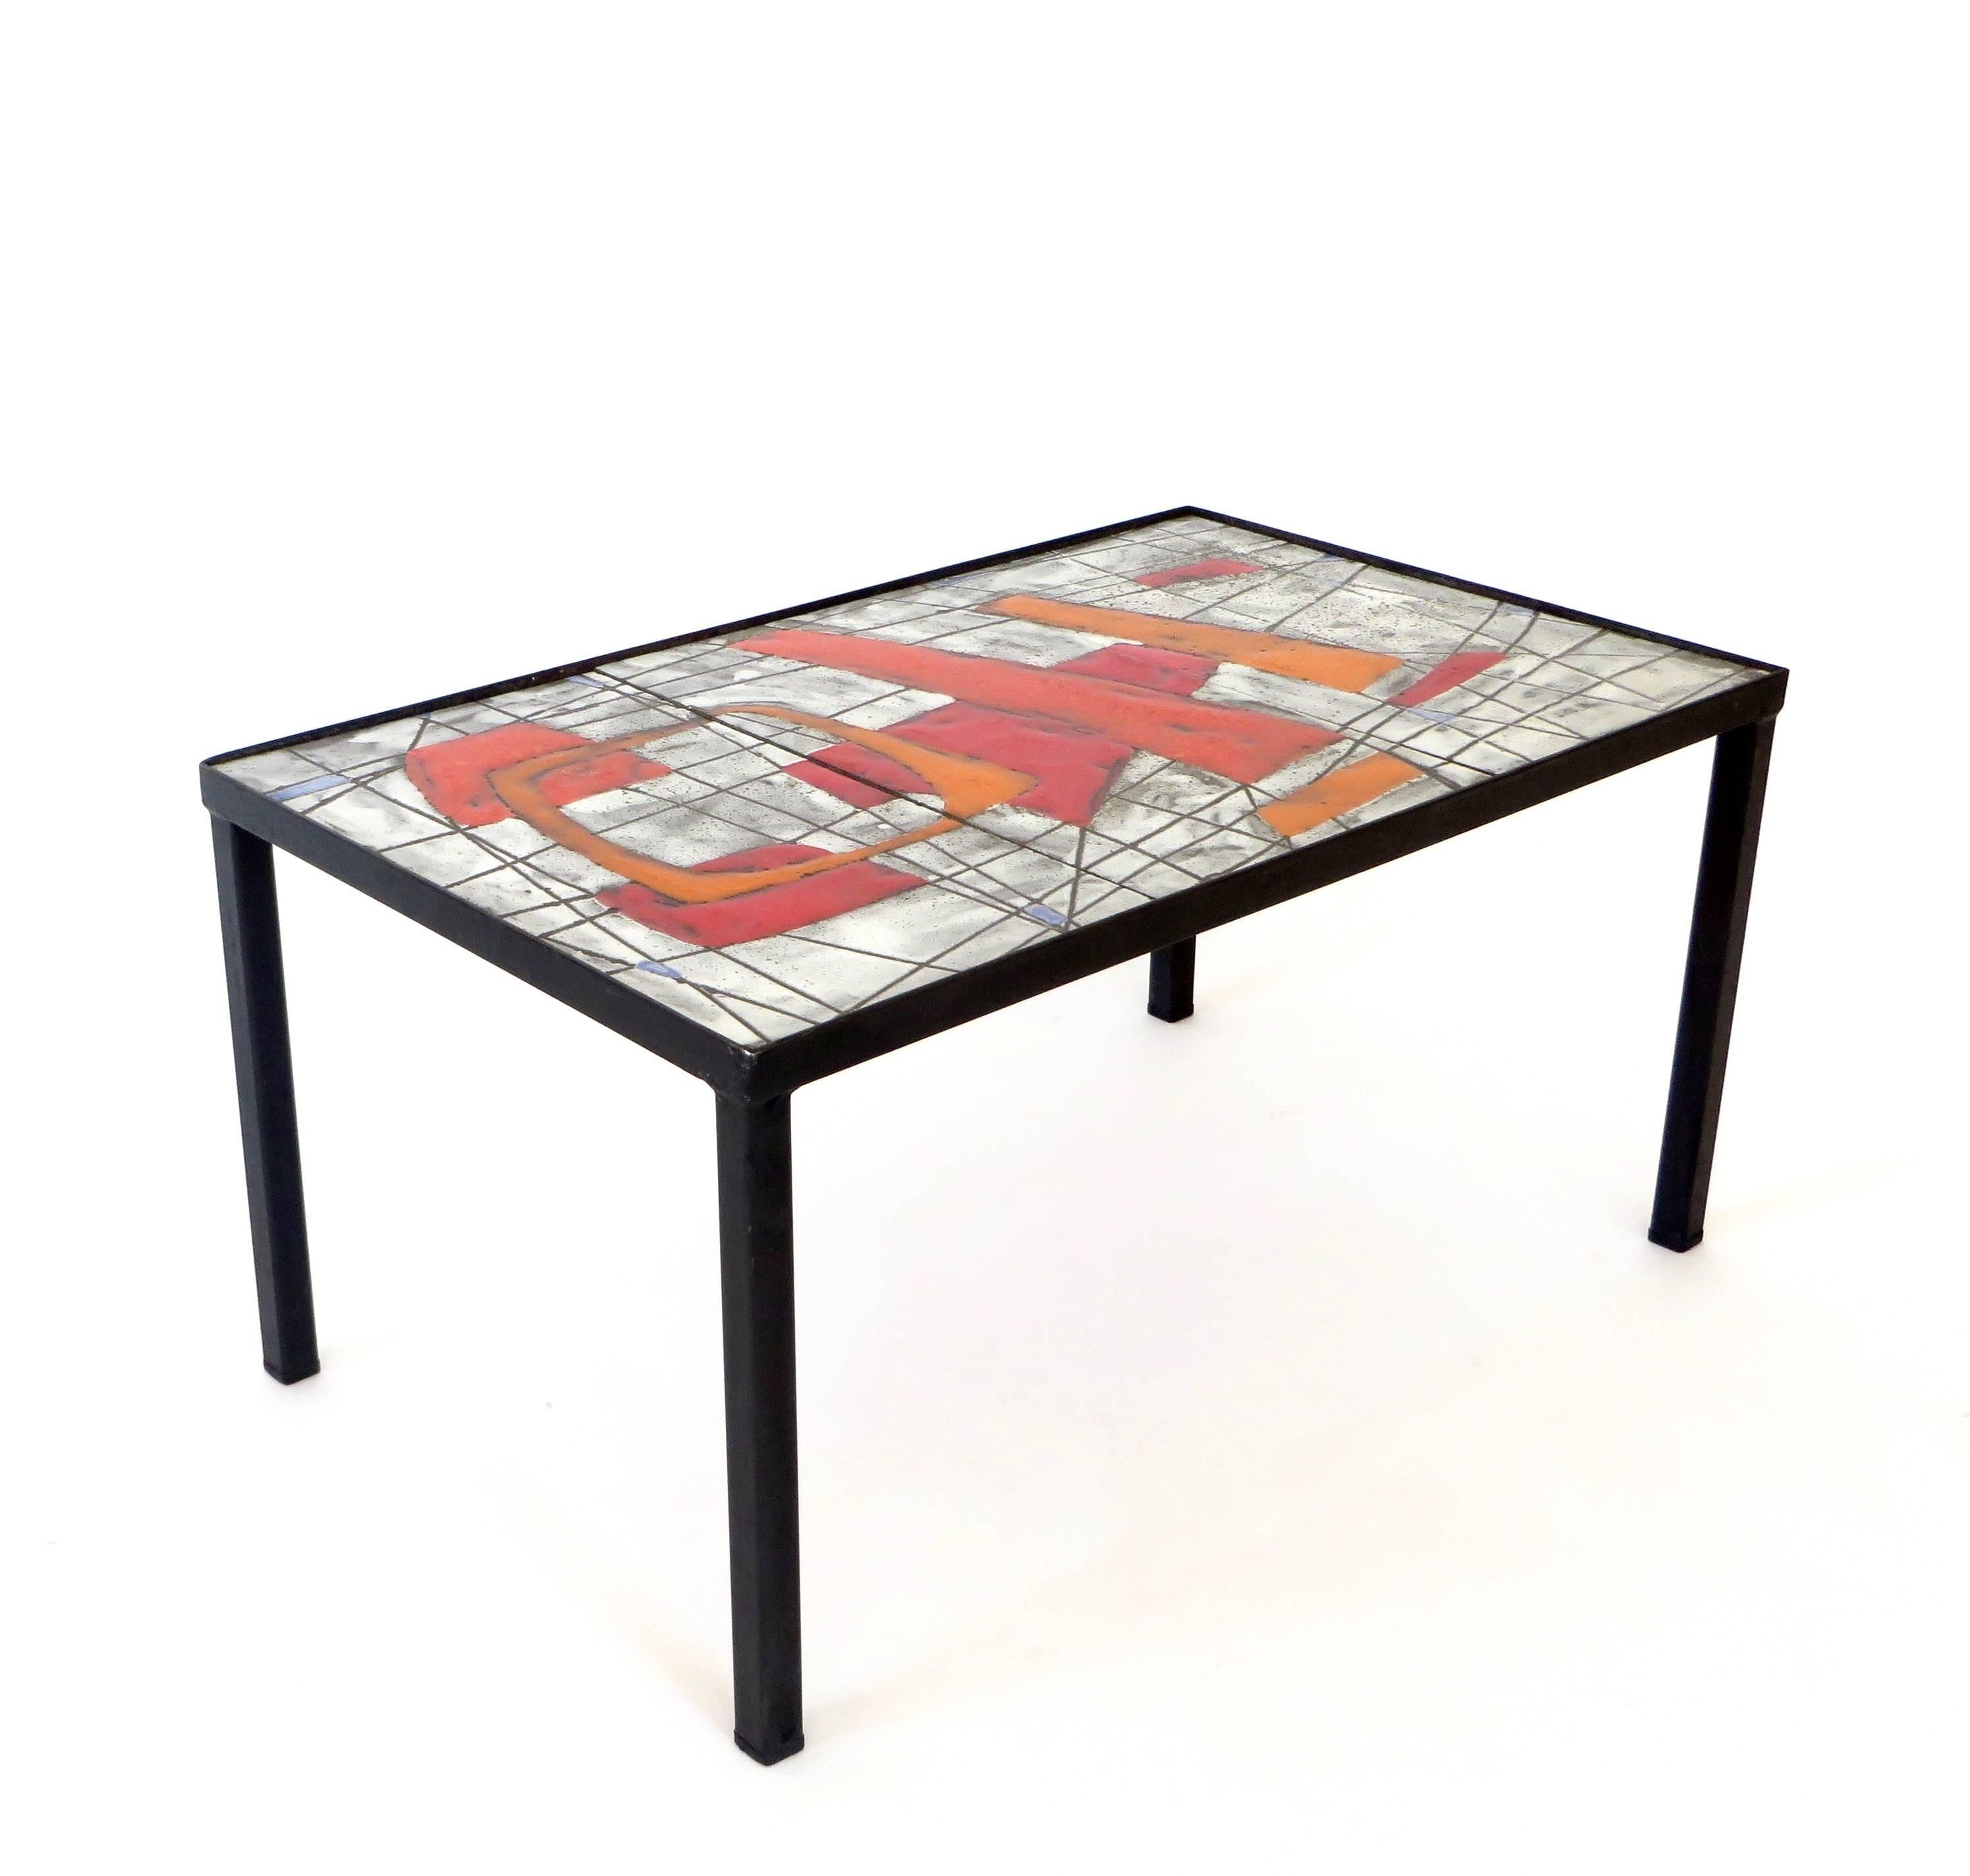 A boldly colorful and graphic ceramic tile glazed top with black metal leg structure, circa 1960, France. Colors of orange, red, grey, black and touches of blue by Jean and Robert Cloutier. 
Documentation: Les Freres Cloutier written by Patrick